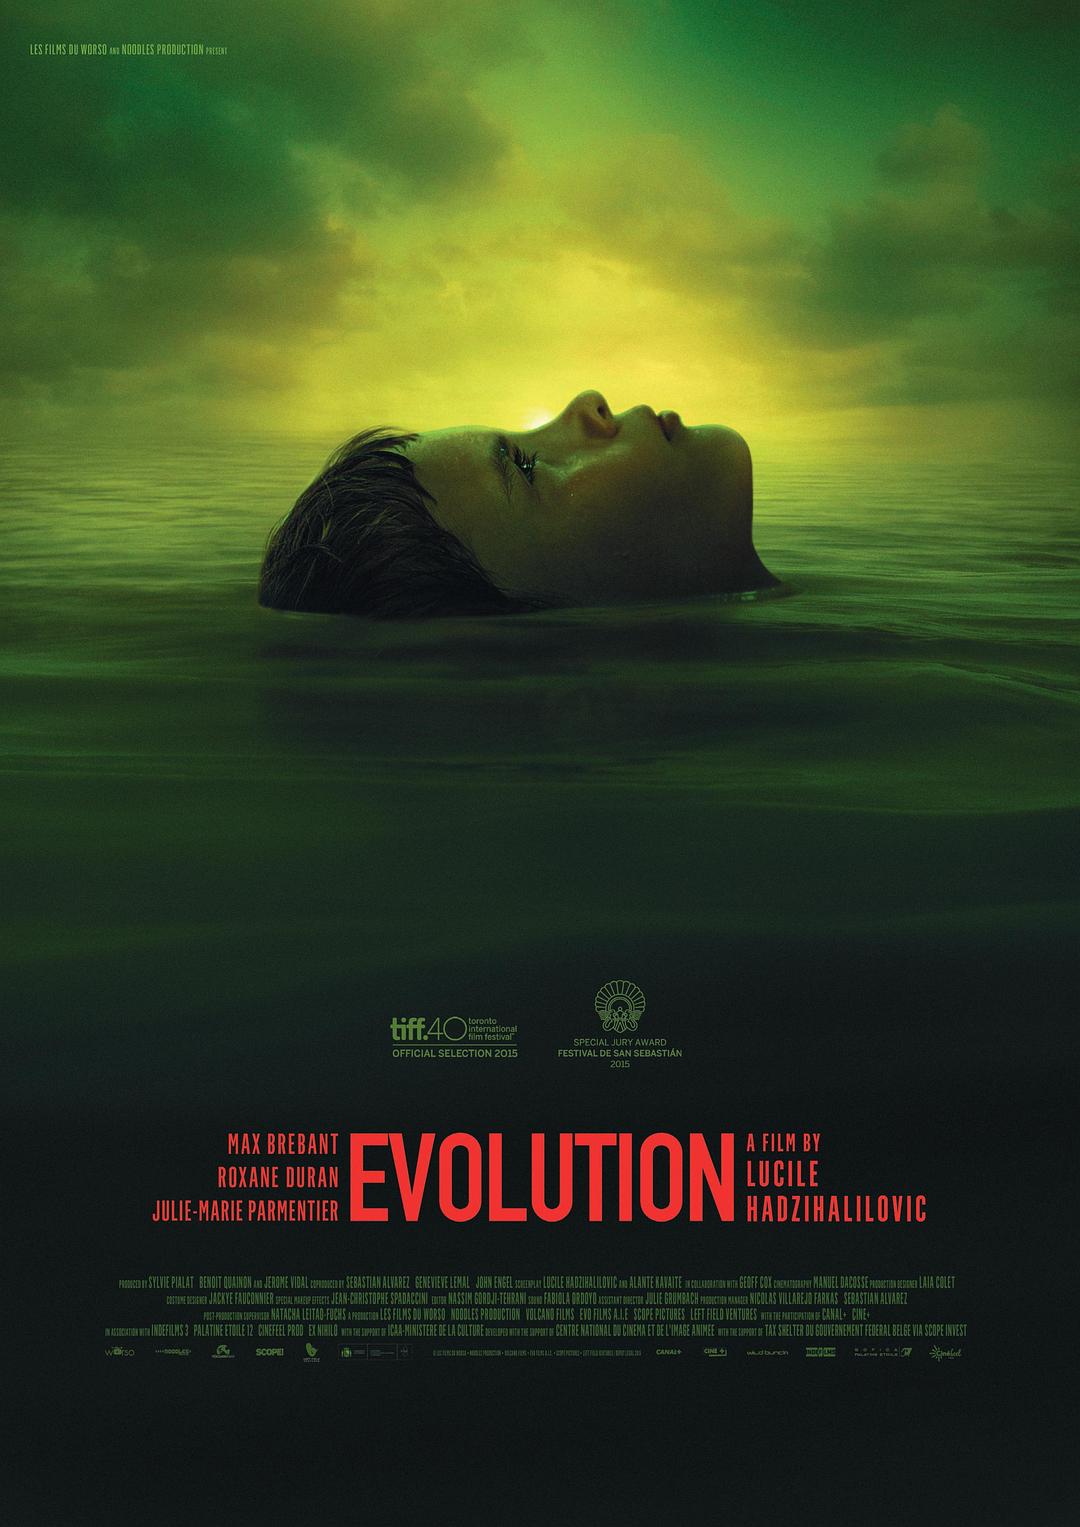  Evolution.2015.LIMITED.SUBBED.1080p.BluRay.x264-USURY 6.56GB-1.png